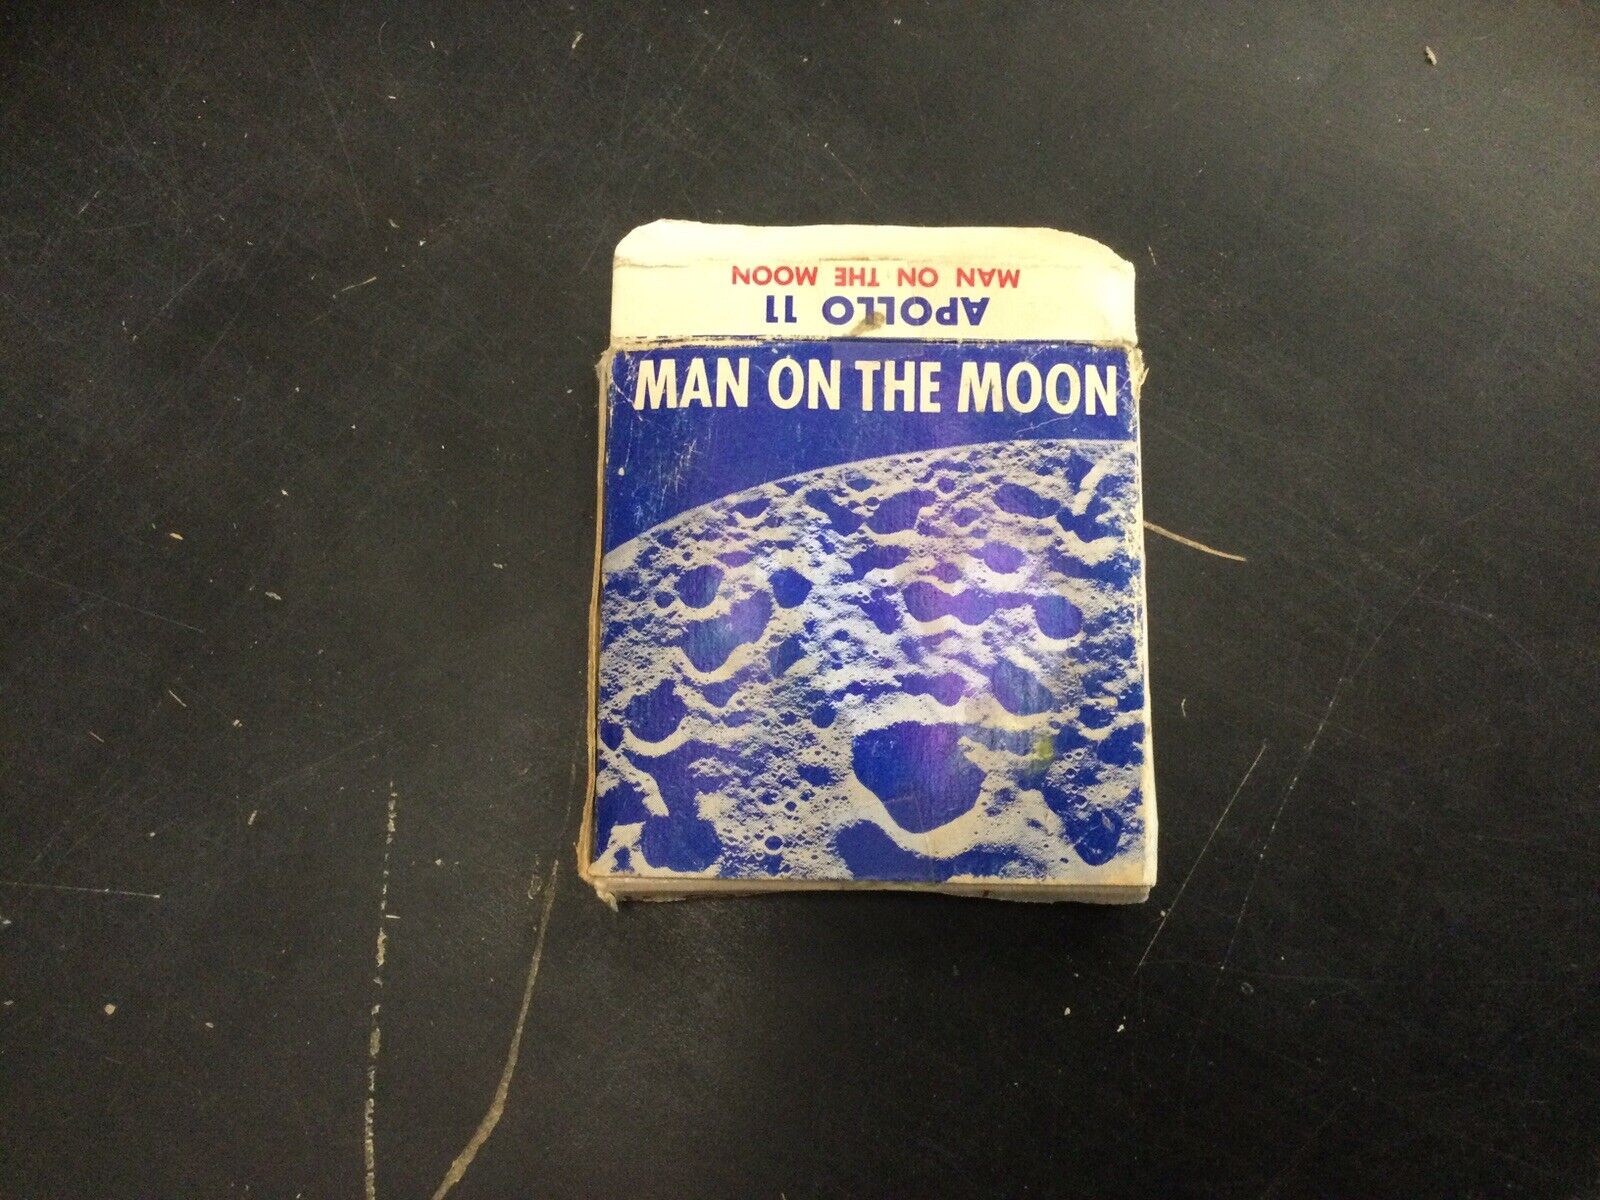 APOLLO 11 Man on the Moon 8mm Official NASA Footage 1969 Columbia Pictures